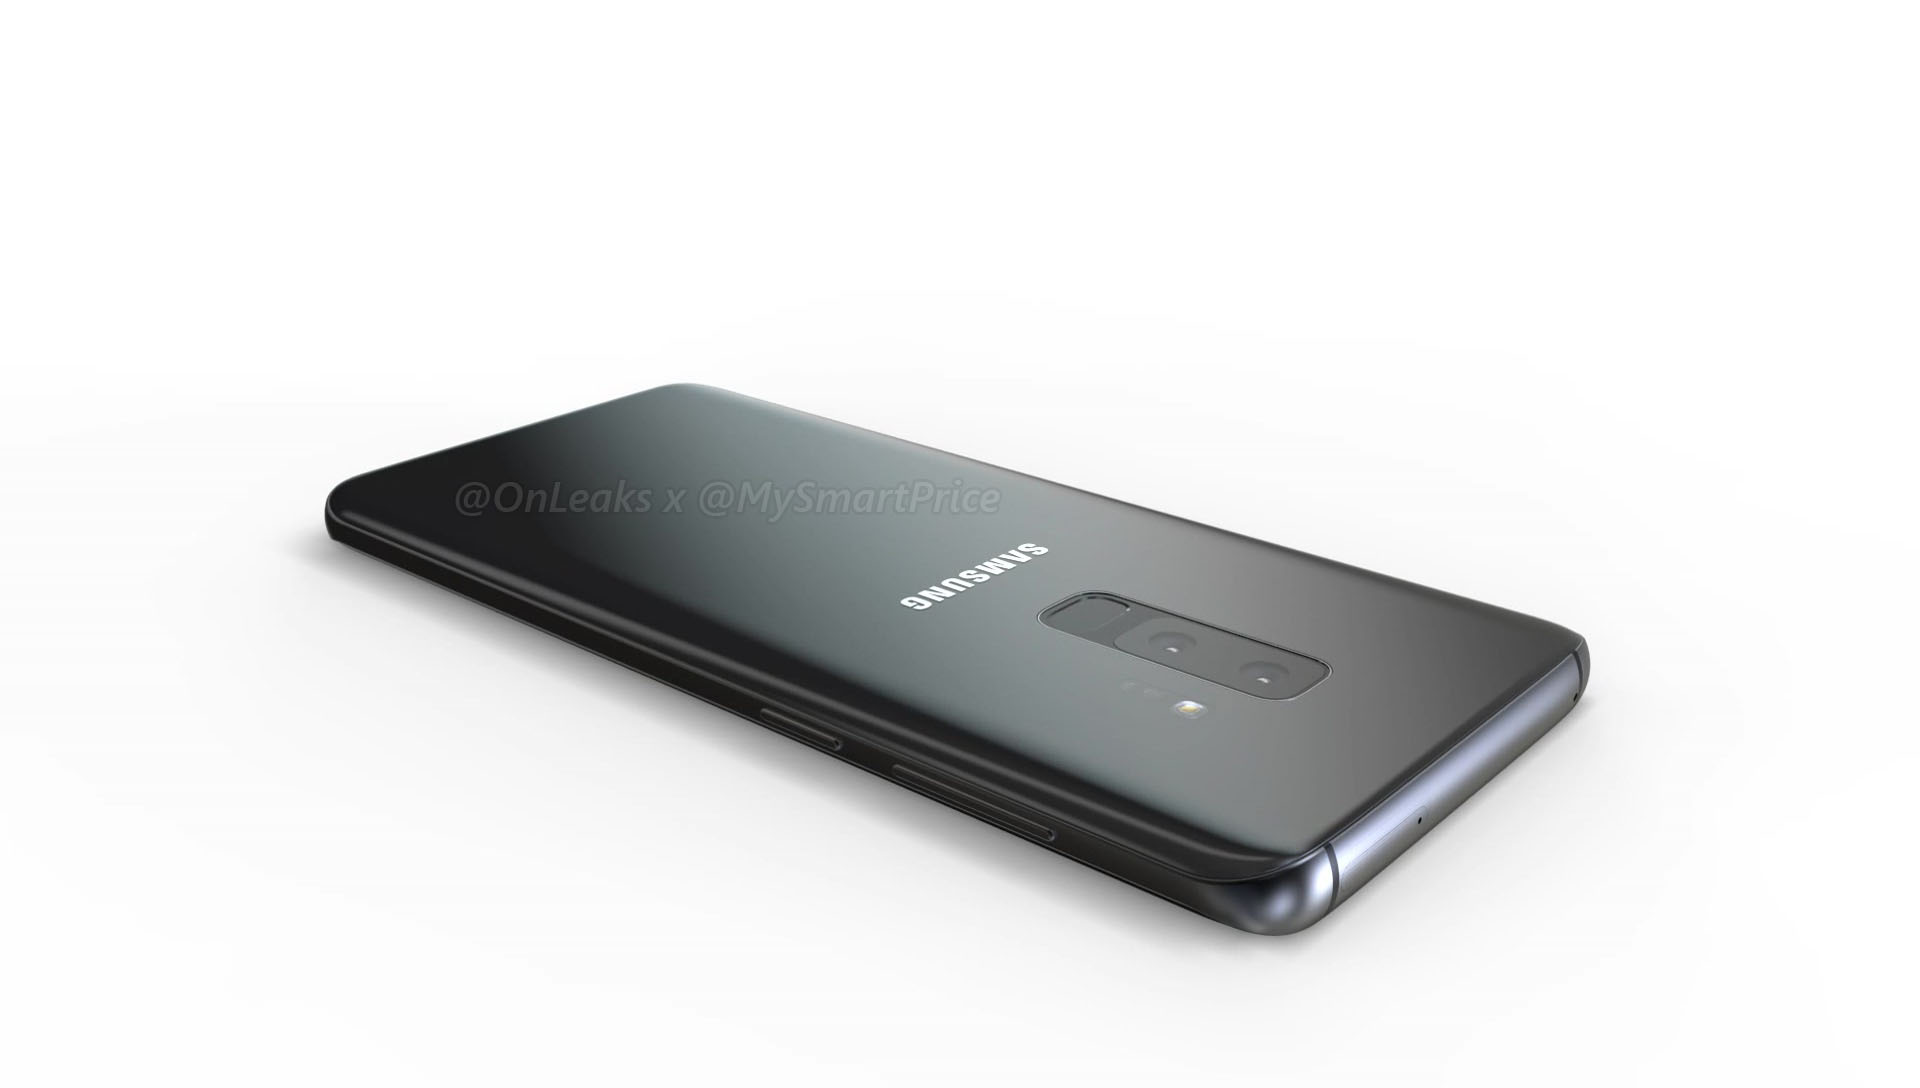 Latest Galaxy S9+ renders show a dual camera, a feature missing from the Galaxy S9